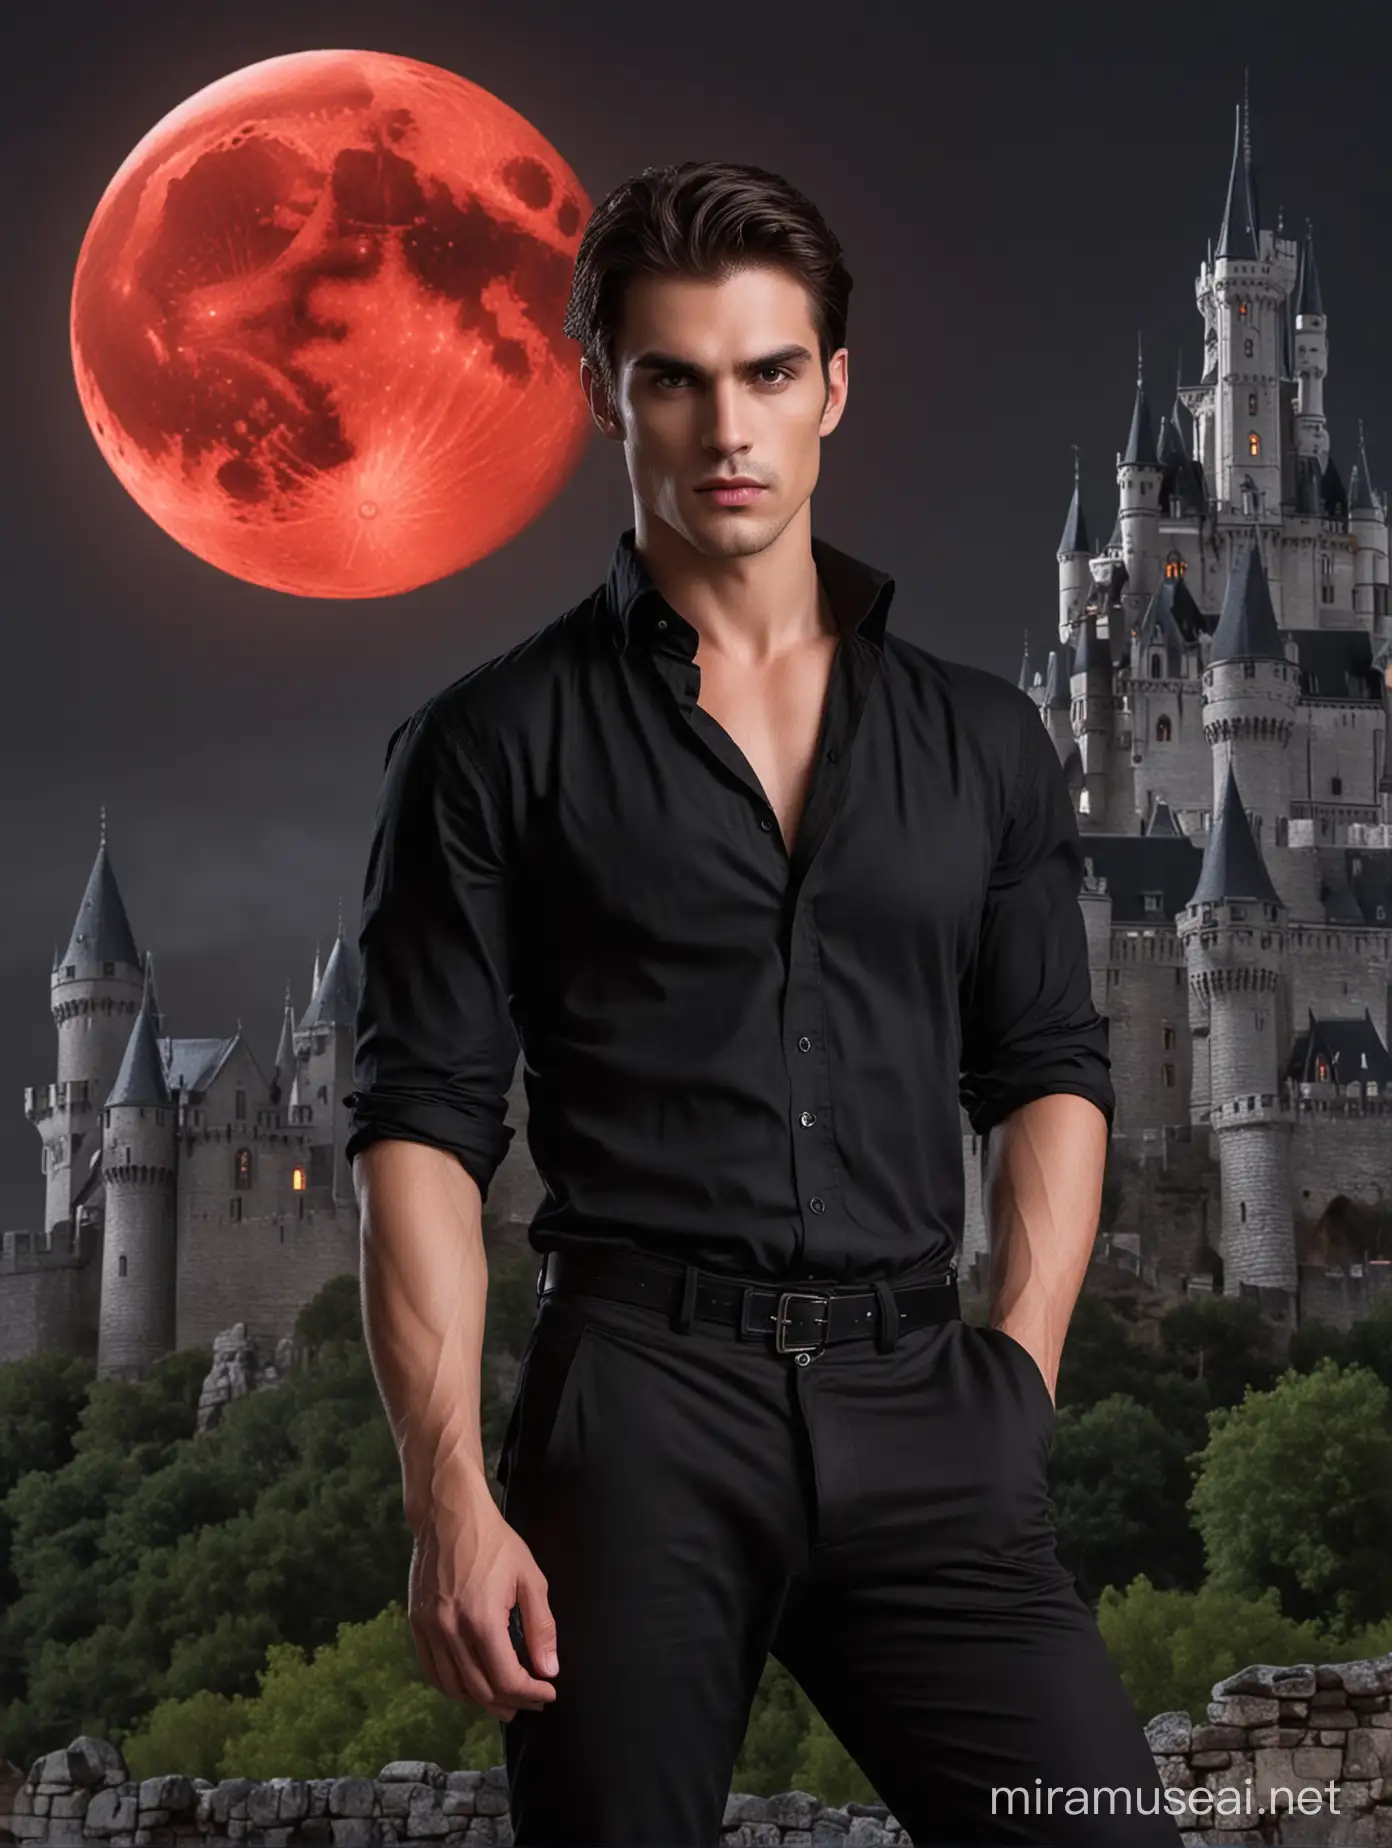 A handsome vampire man wearing a black shirt and black fitted pants while looking at the camera intently. The background should be black and there’s a castle behind him and red full moon.